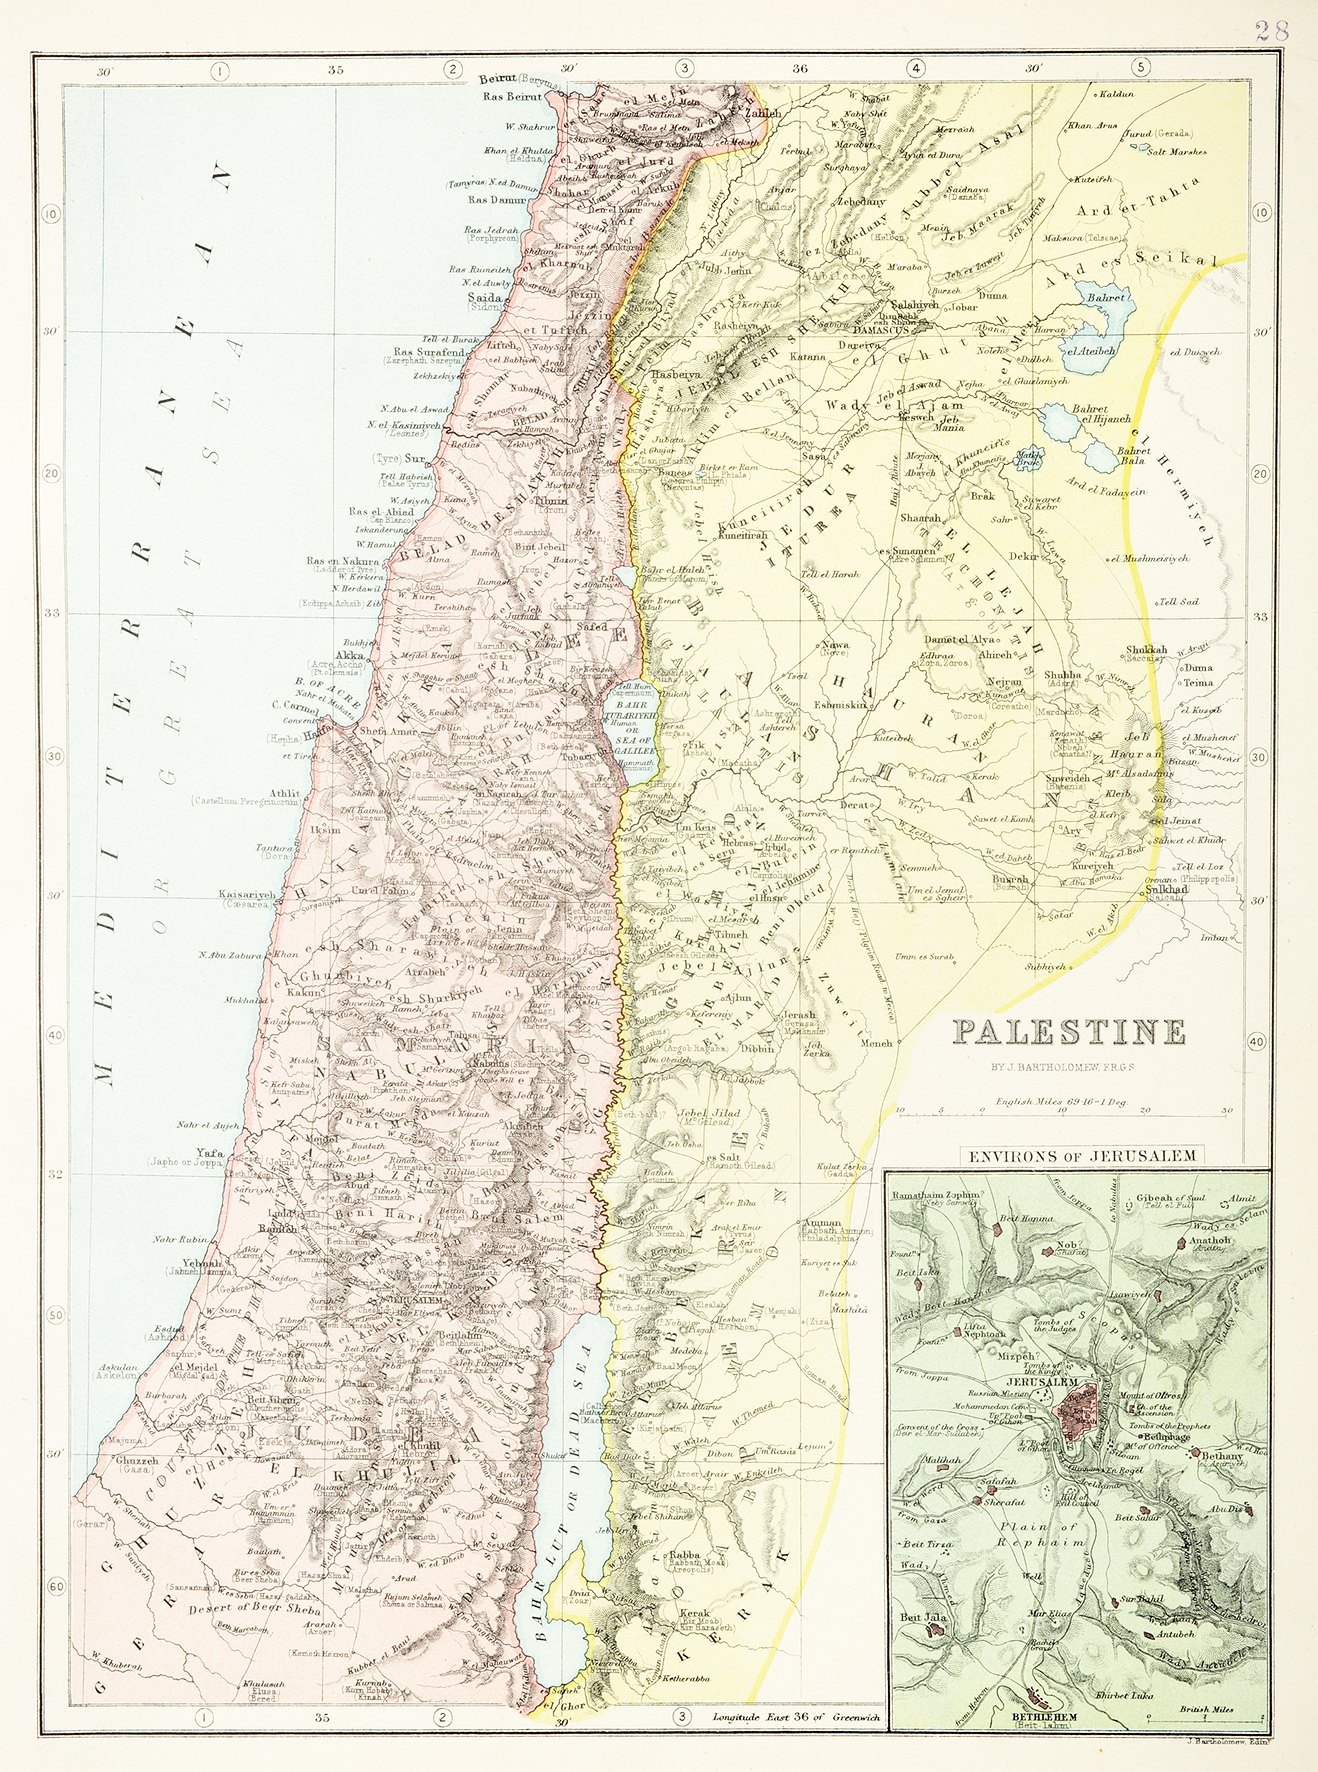 Palestine - Antique Print from 1890